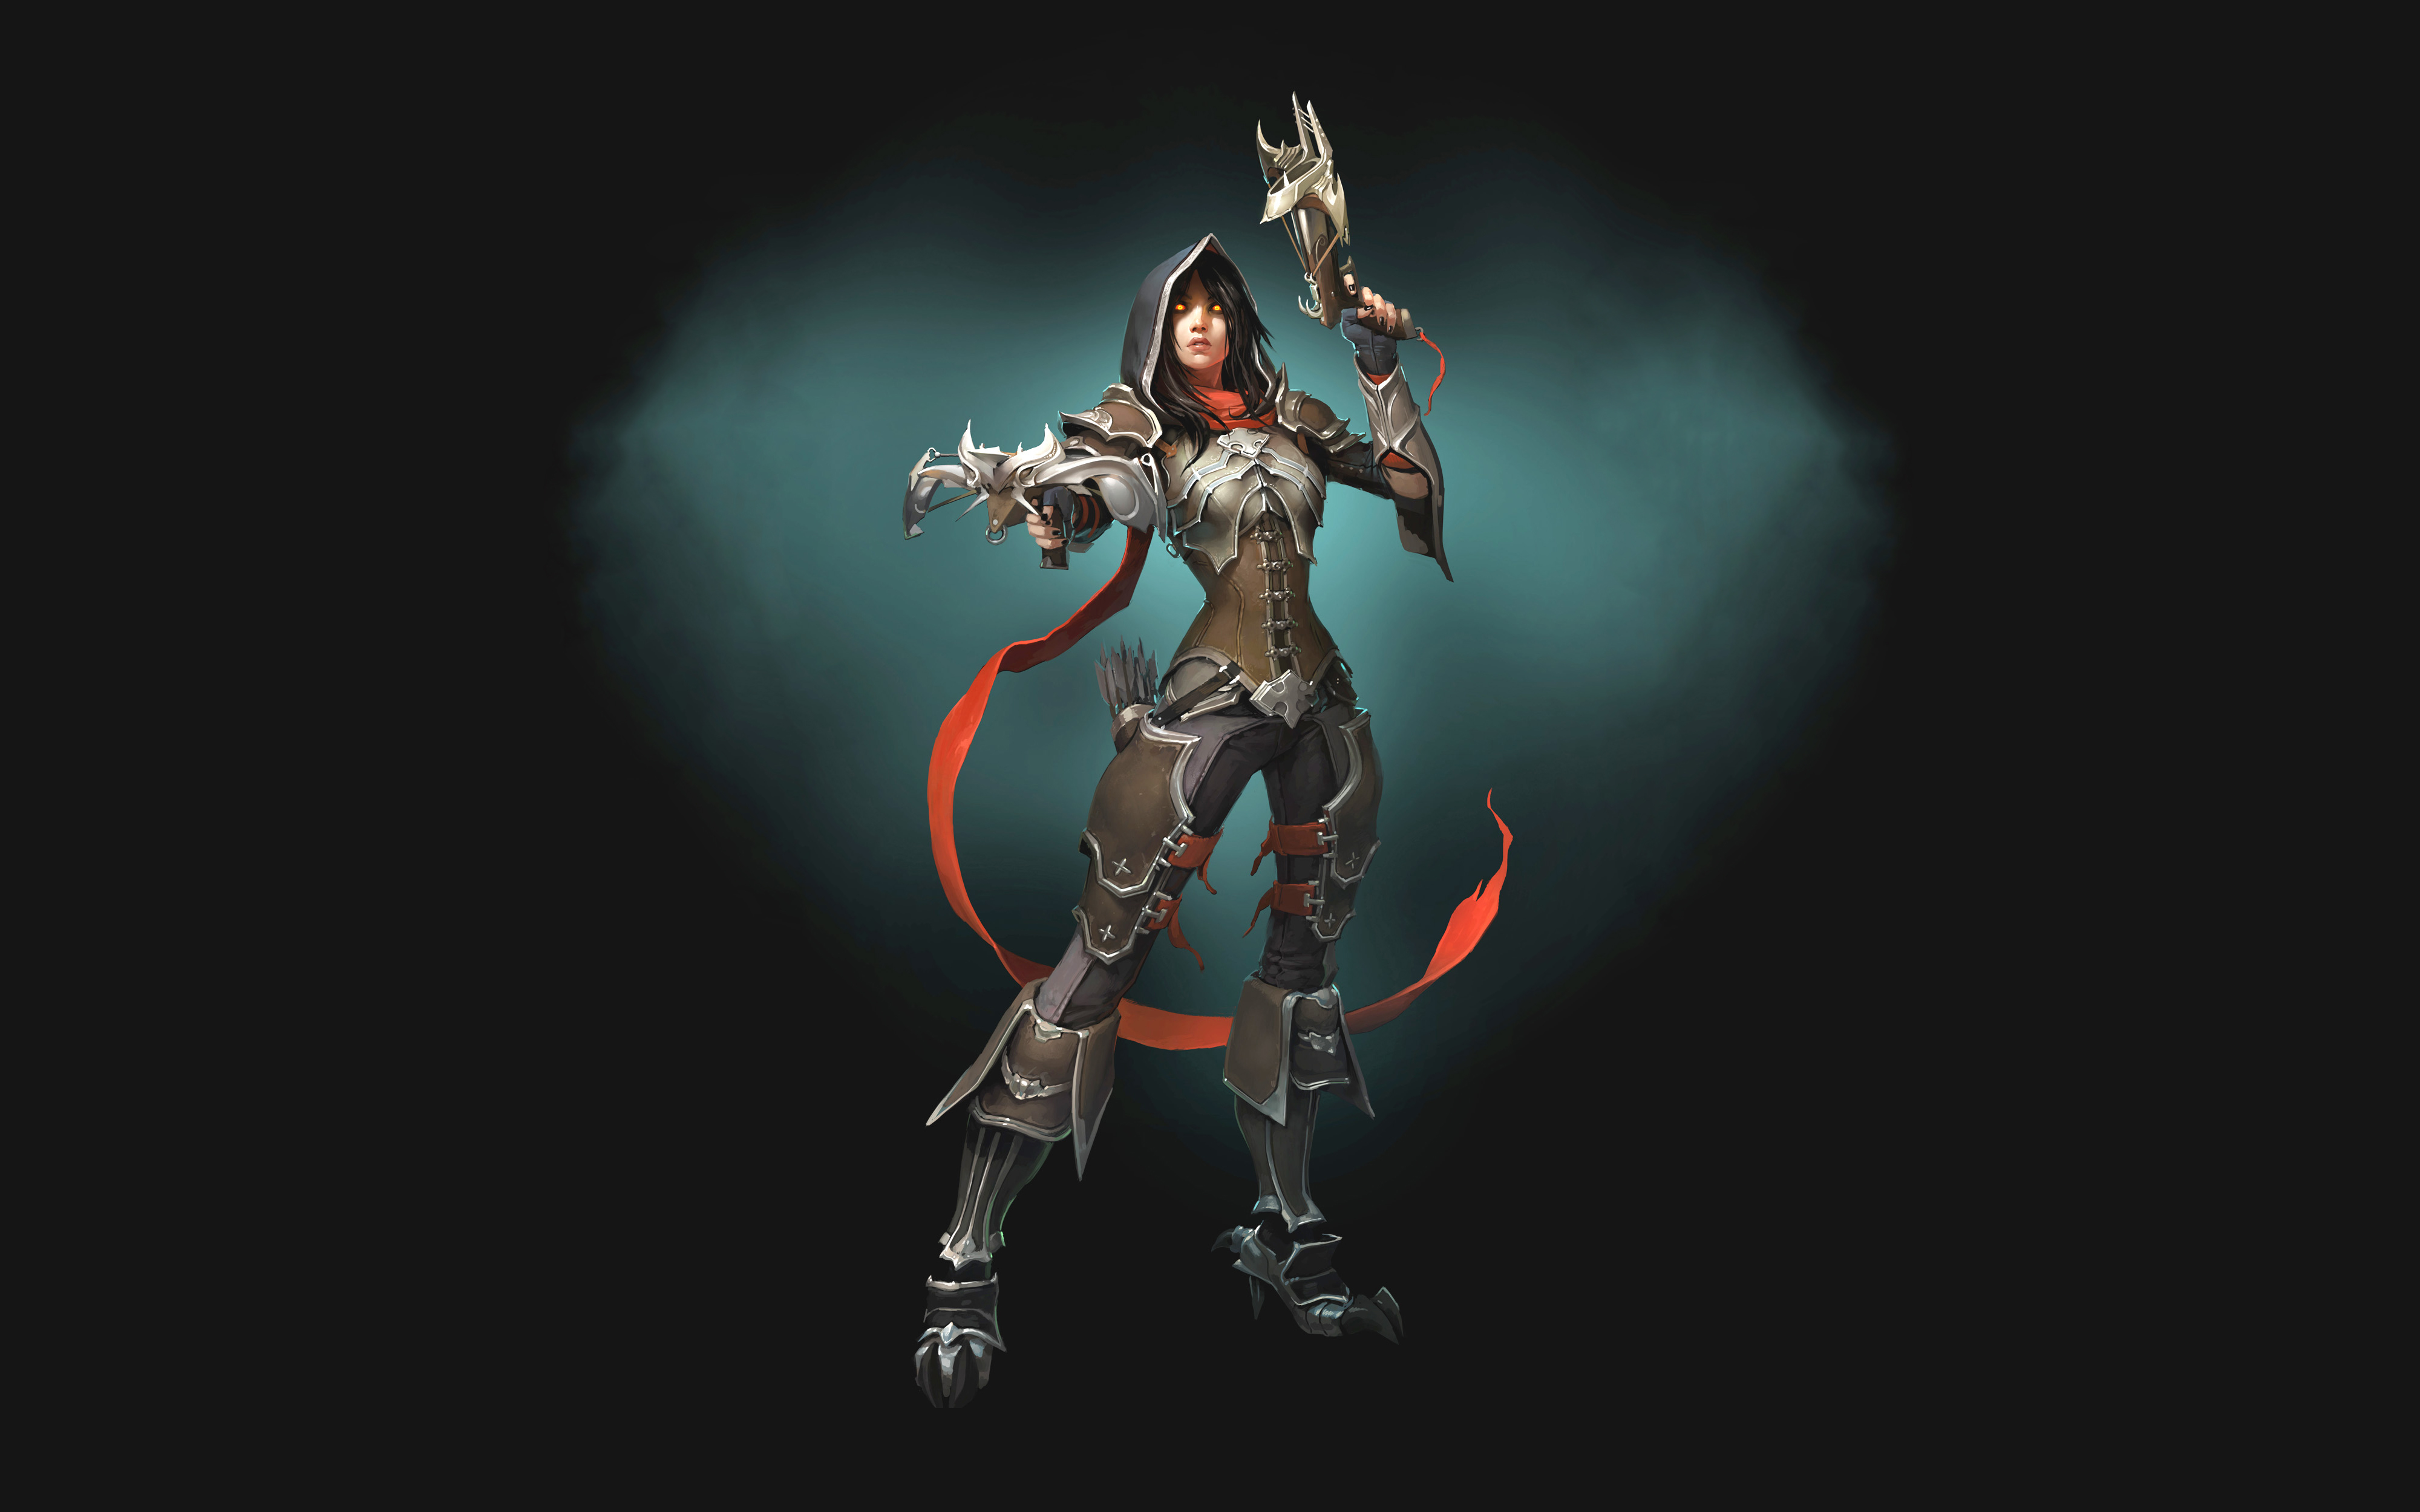  demon hunter girl armor crossbows simple background wallpapers